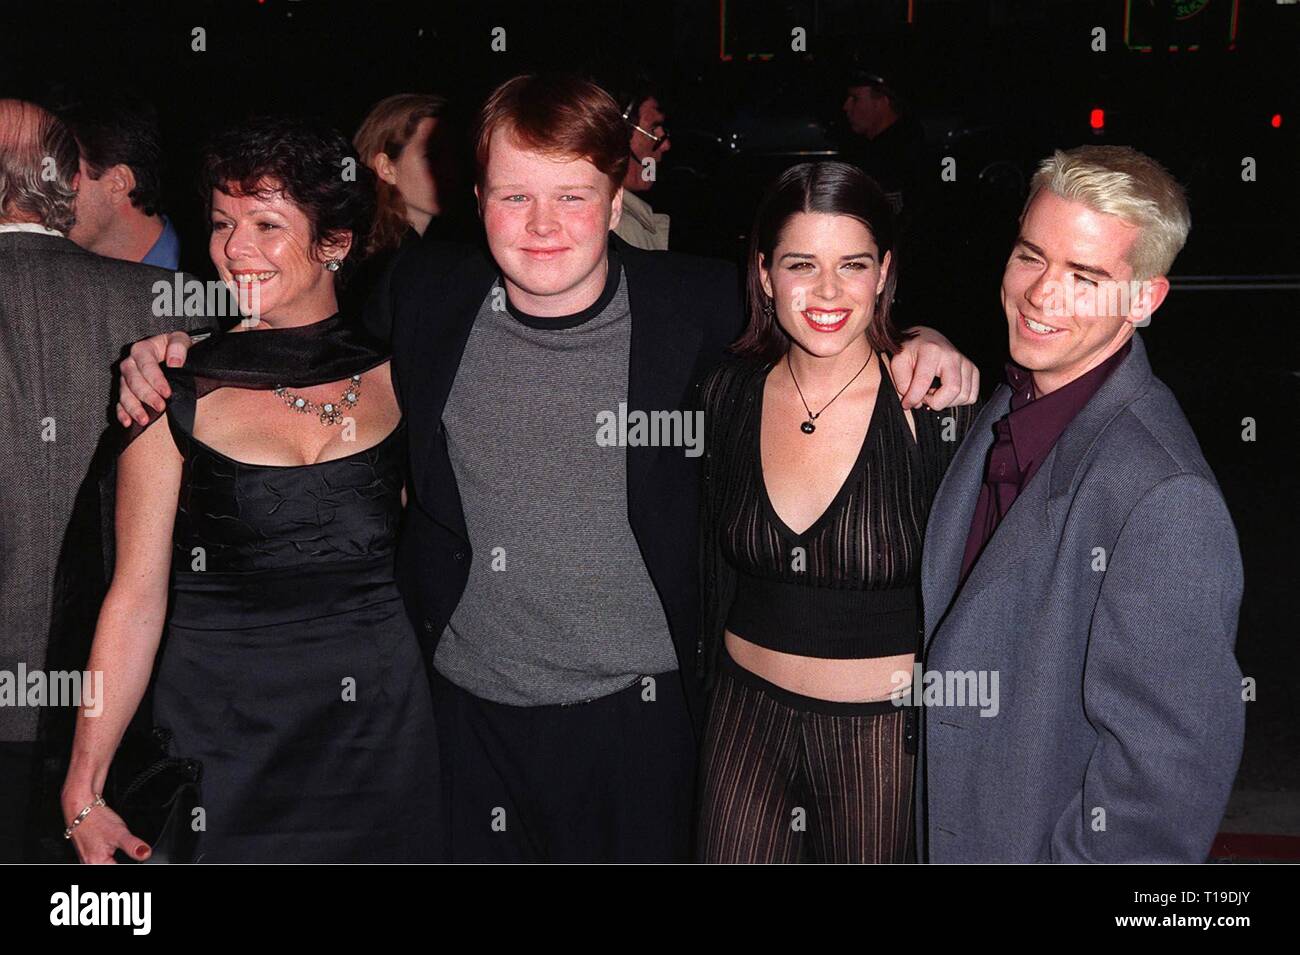 LOS ANGELES, CA - March 6, 1998: Actress NEVE CAMPBELL & mother & brothers at the Hollywood premiere of her new movie, 'Wild Things,' in which she stars with Kevin Bacon and Matt Dillon. Stock Photo